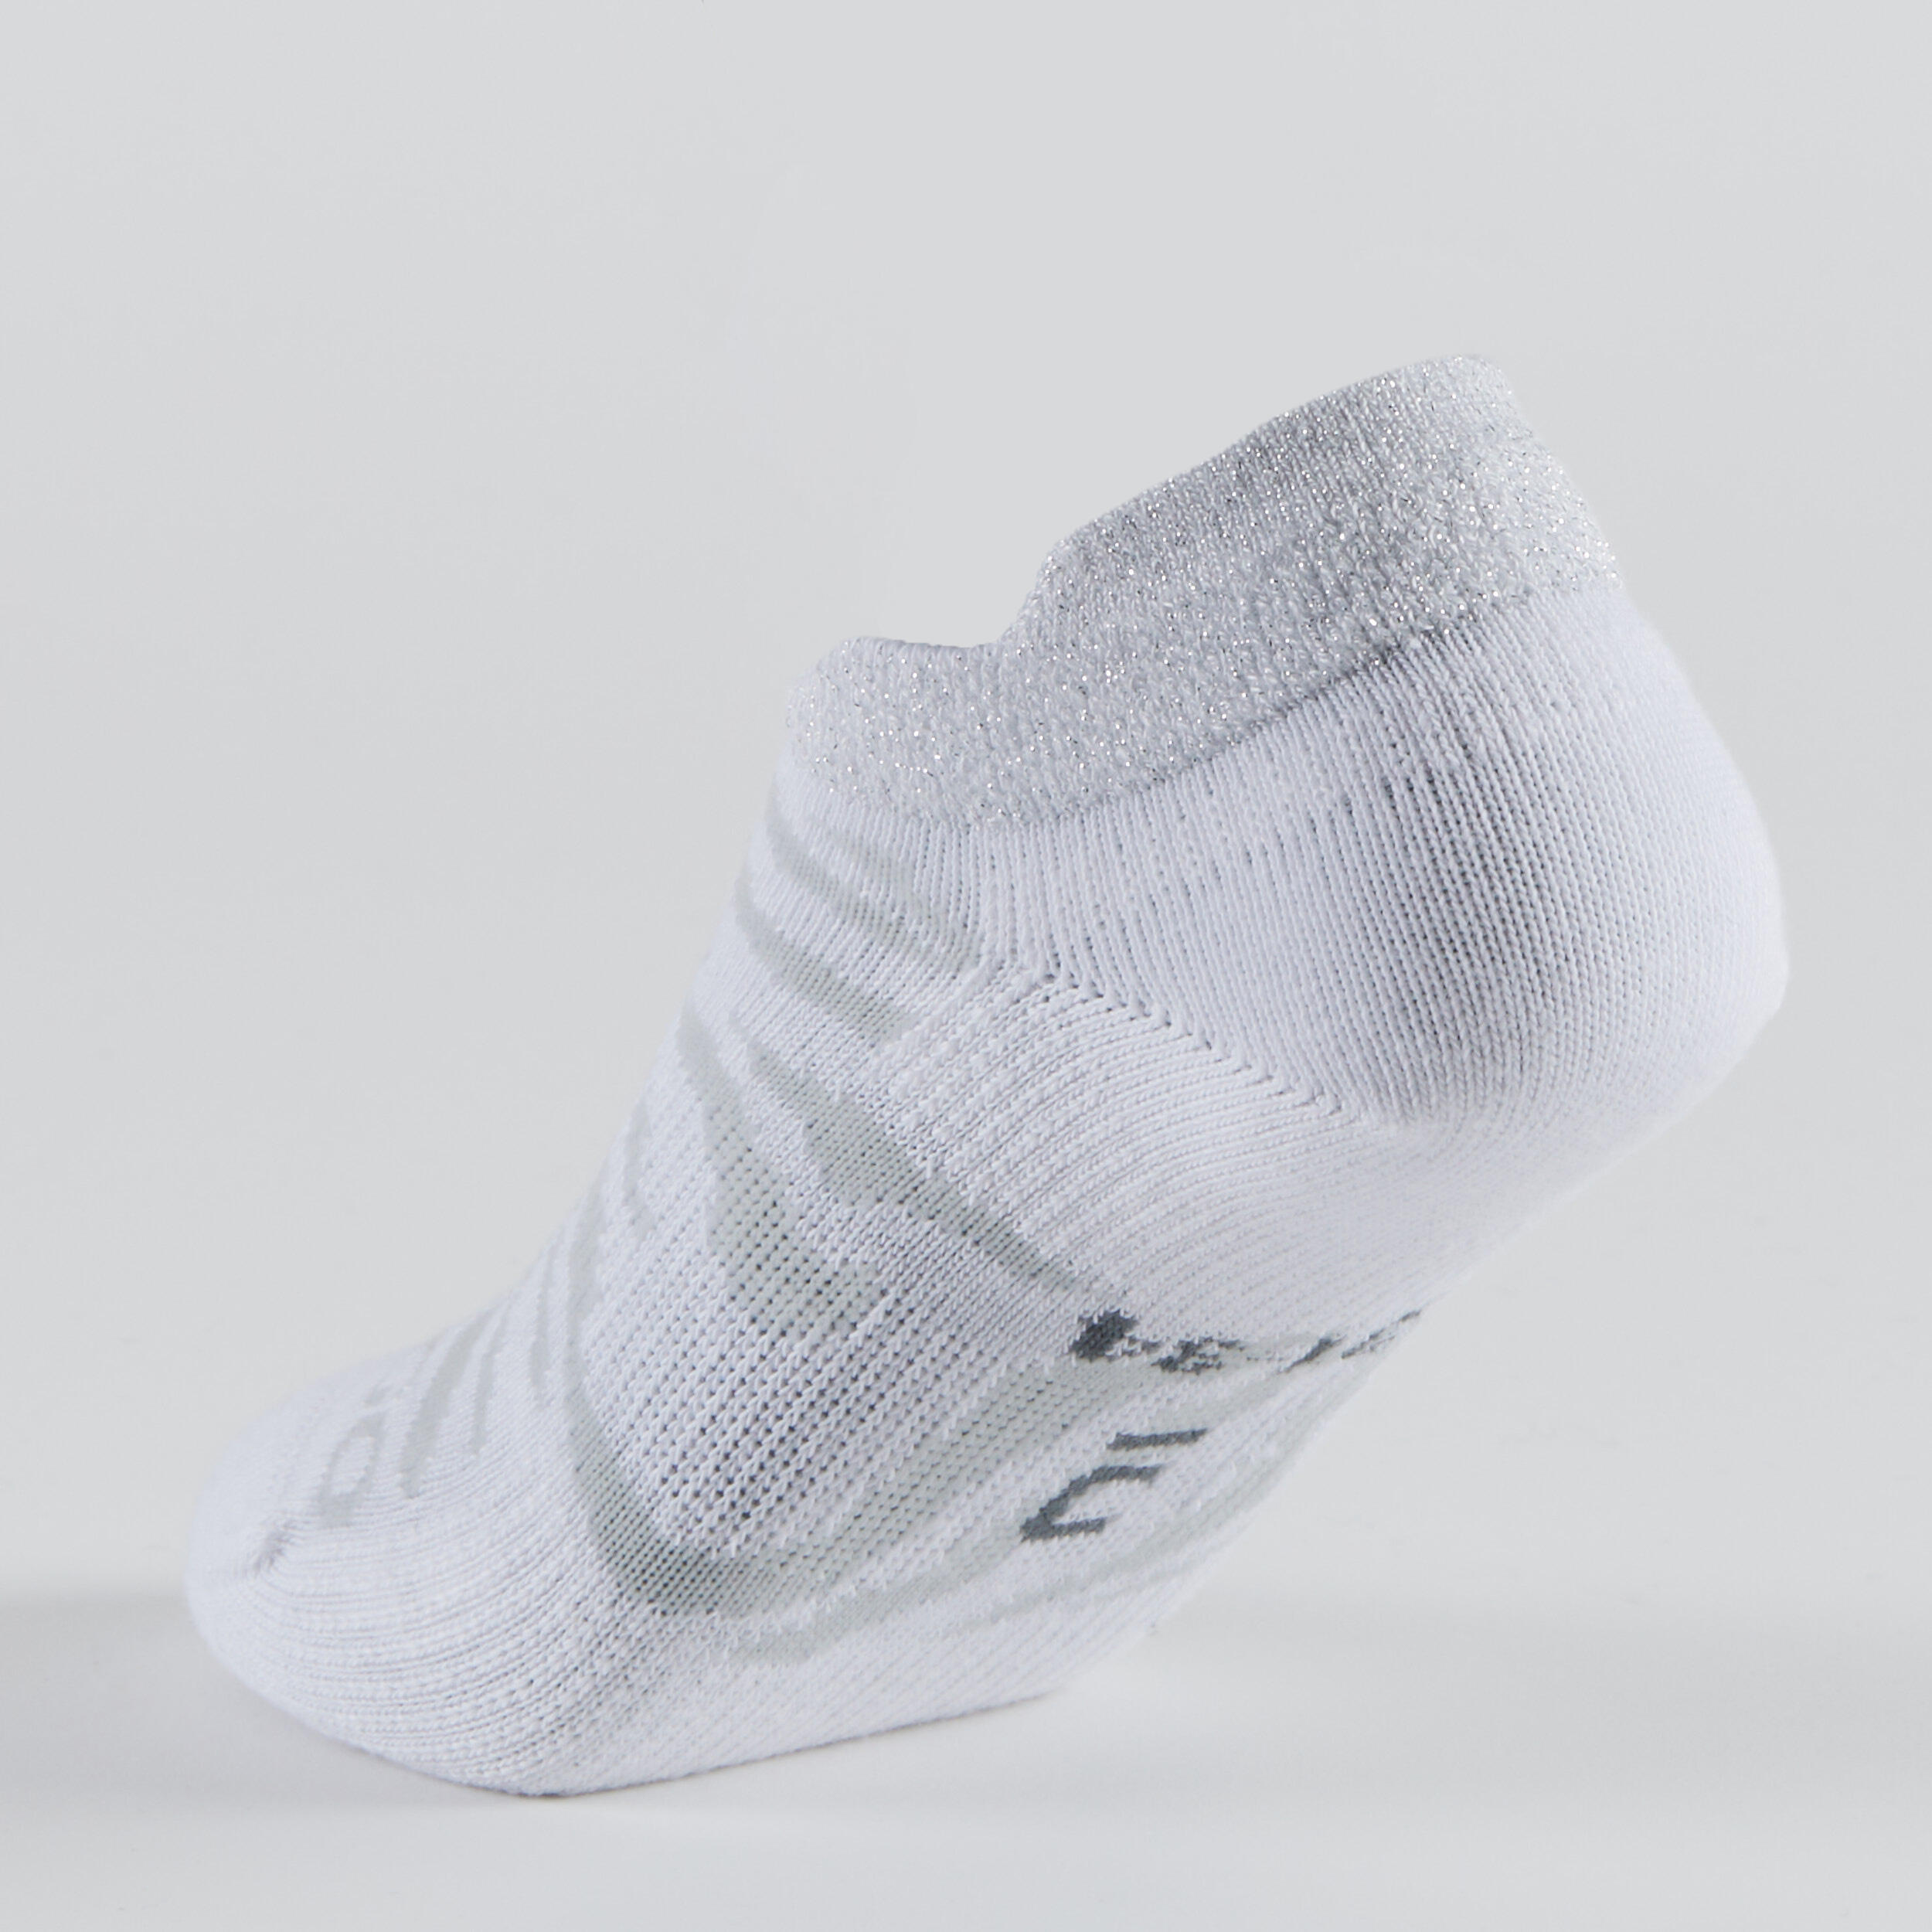 Kids' Low Tennis Socks Tri-Pack RS 160 - White with Patterns 9/14